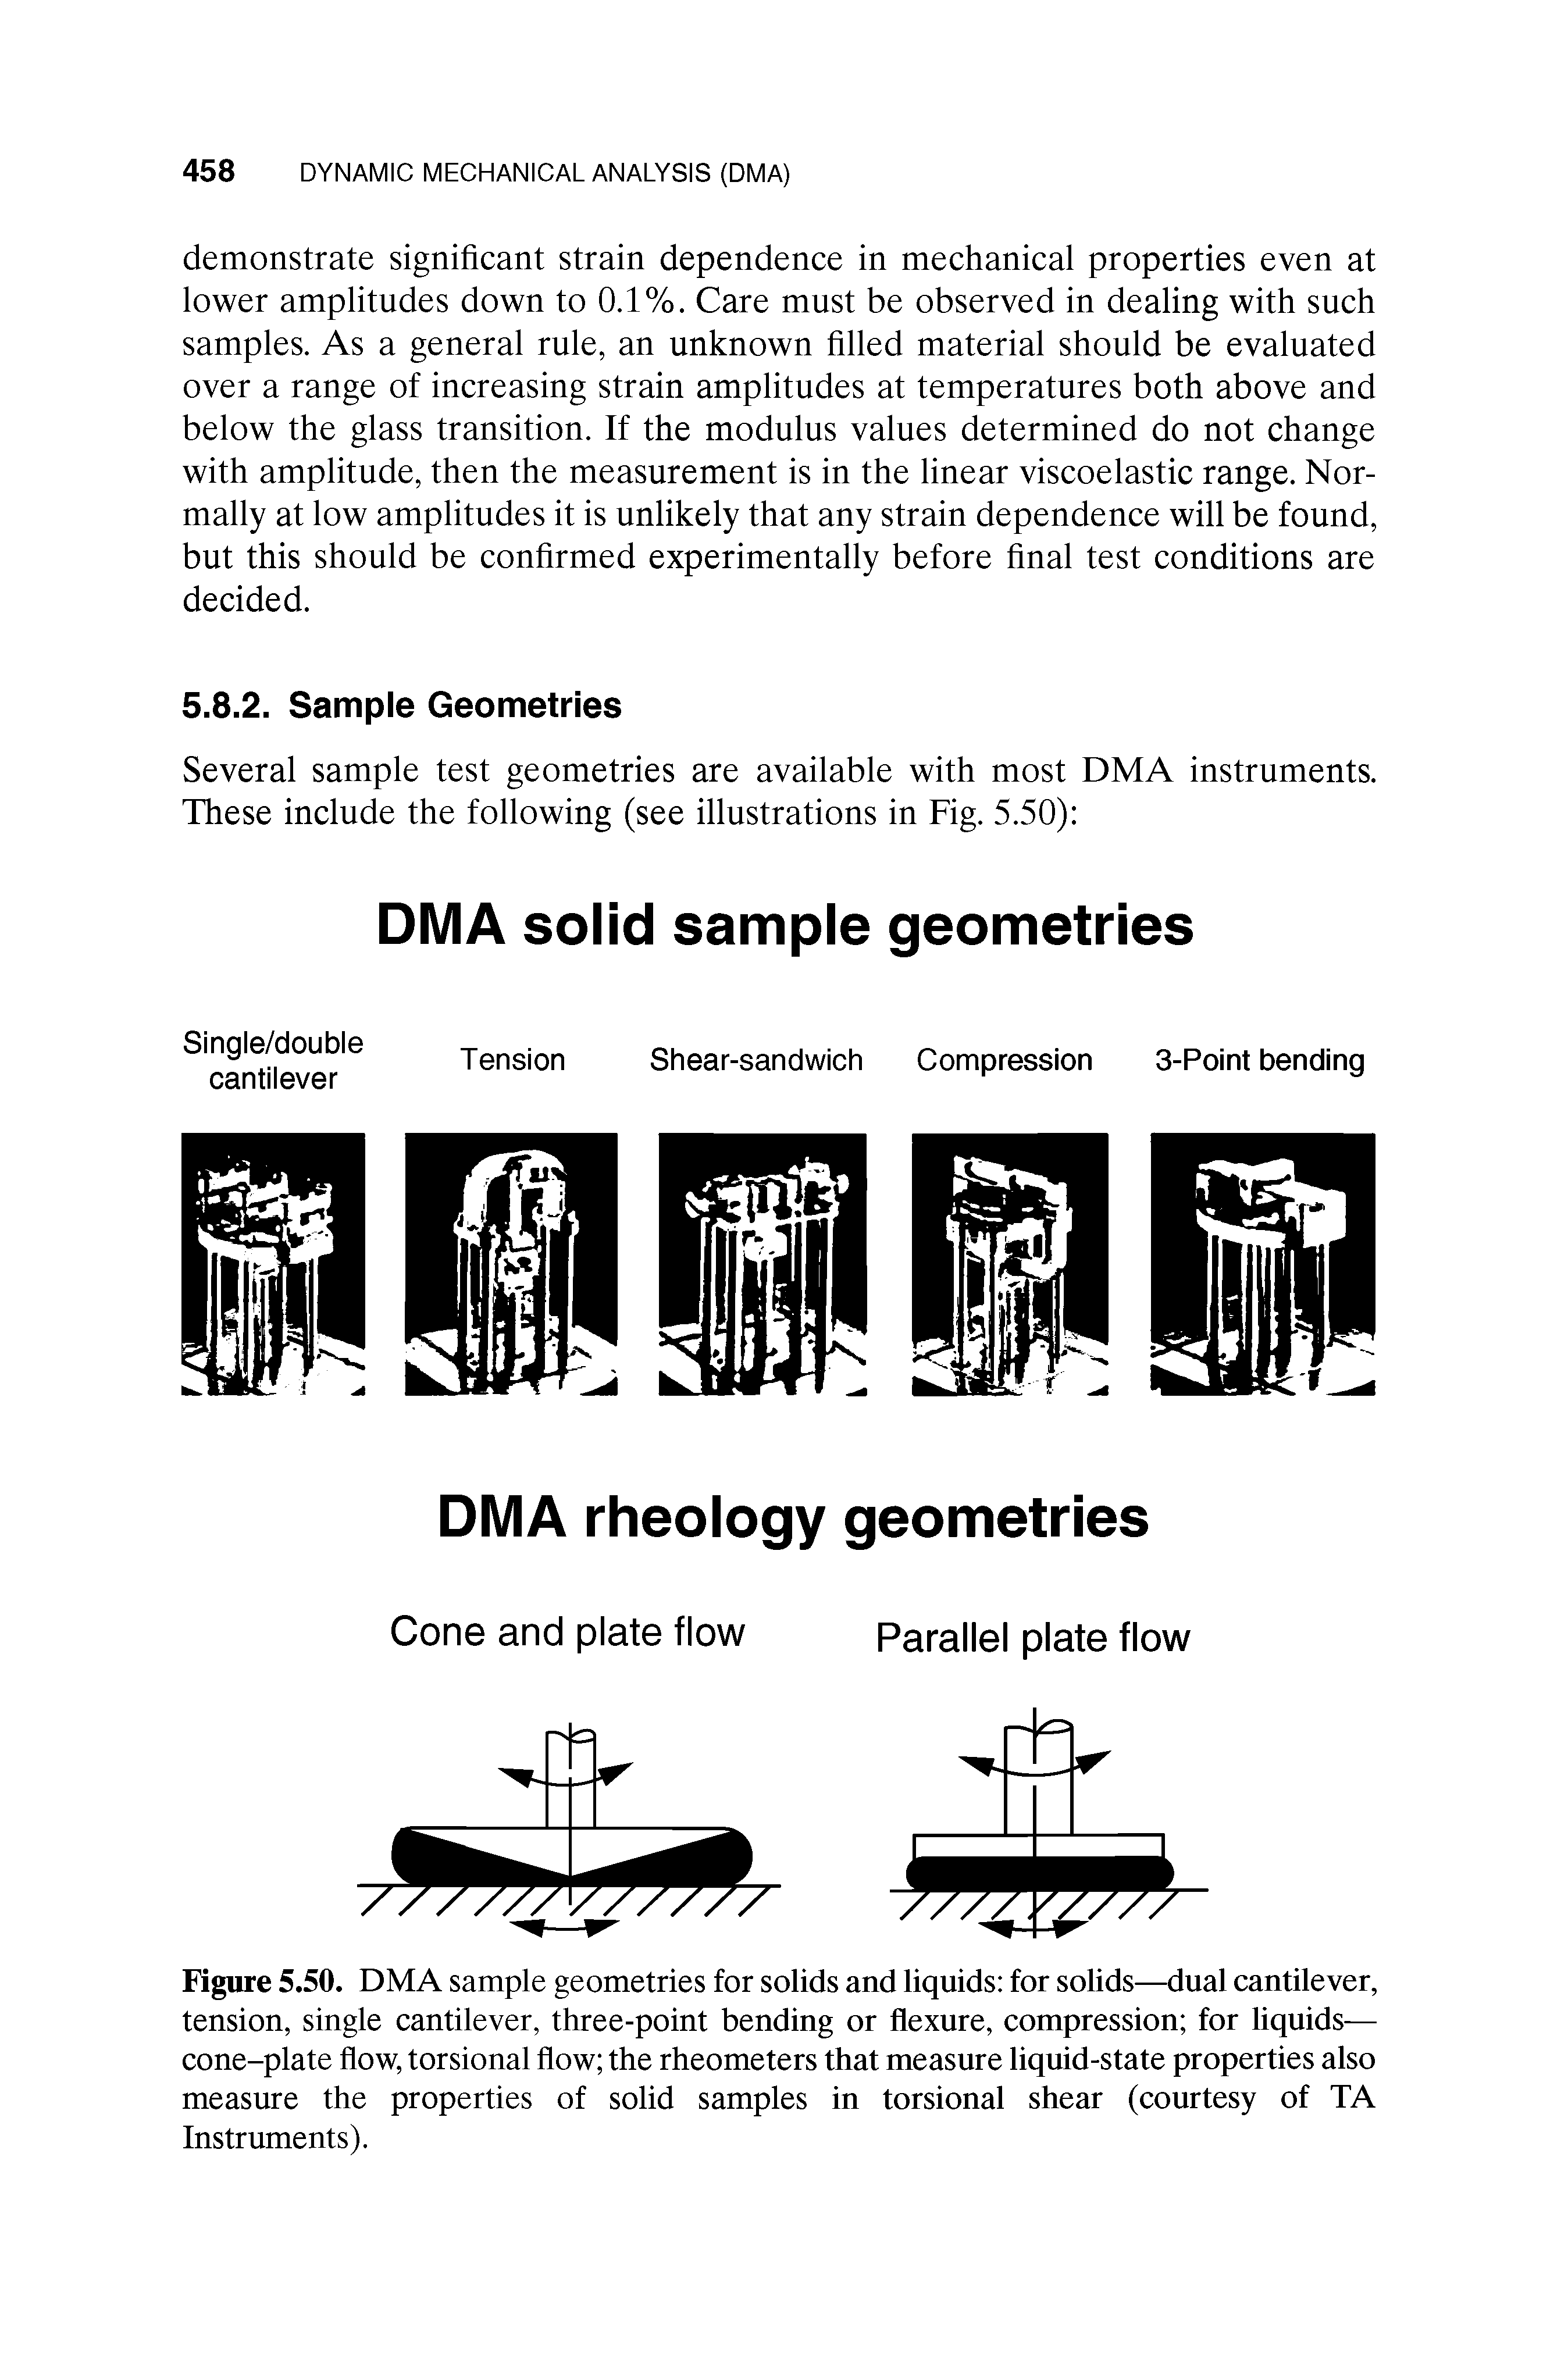 Figure 5.50. DMA sample geometries for solids and liquids for solids—dual cantilever, tension, single cantilever, three-point bending or flexure, compression for liquids— cone-plate flow, torsional flow the rheometers that measure liquid-state properties also measure the properties of solid samples in torsional shear (courtesy of TA Instruments).